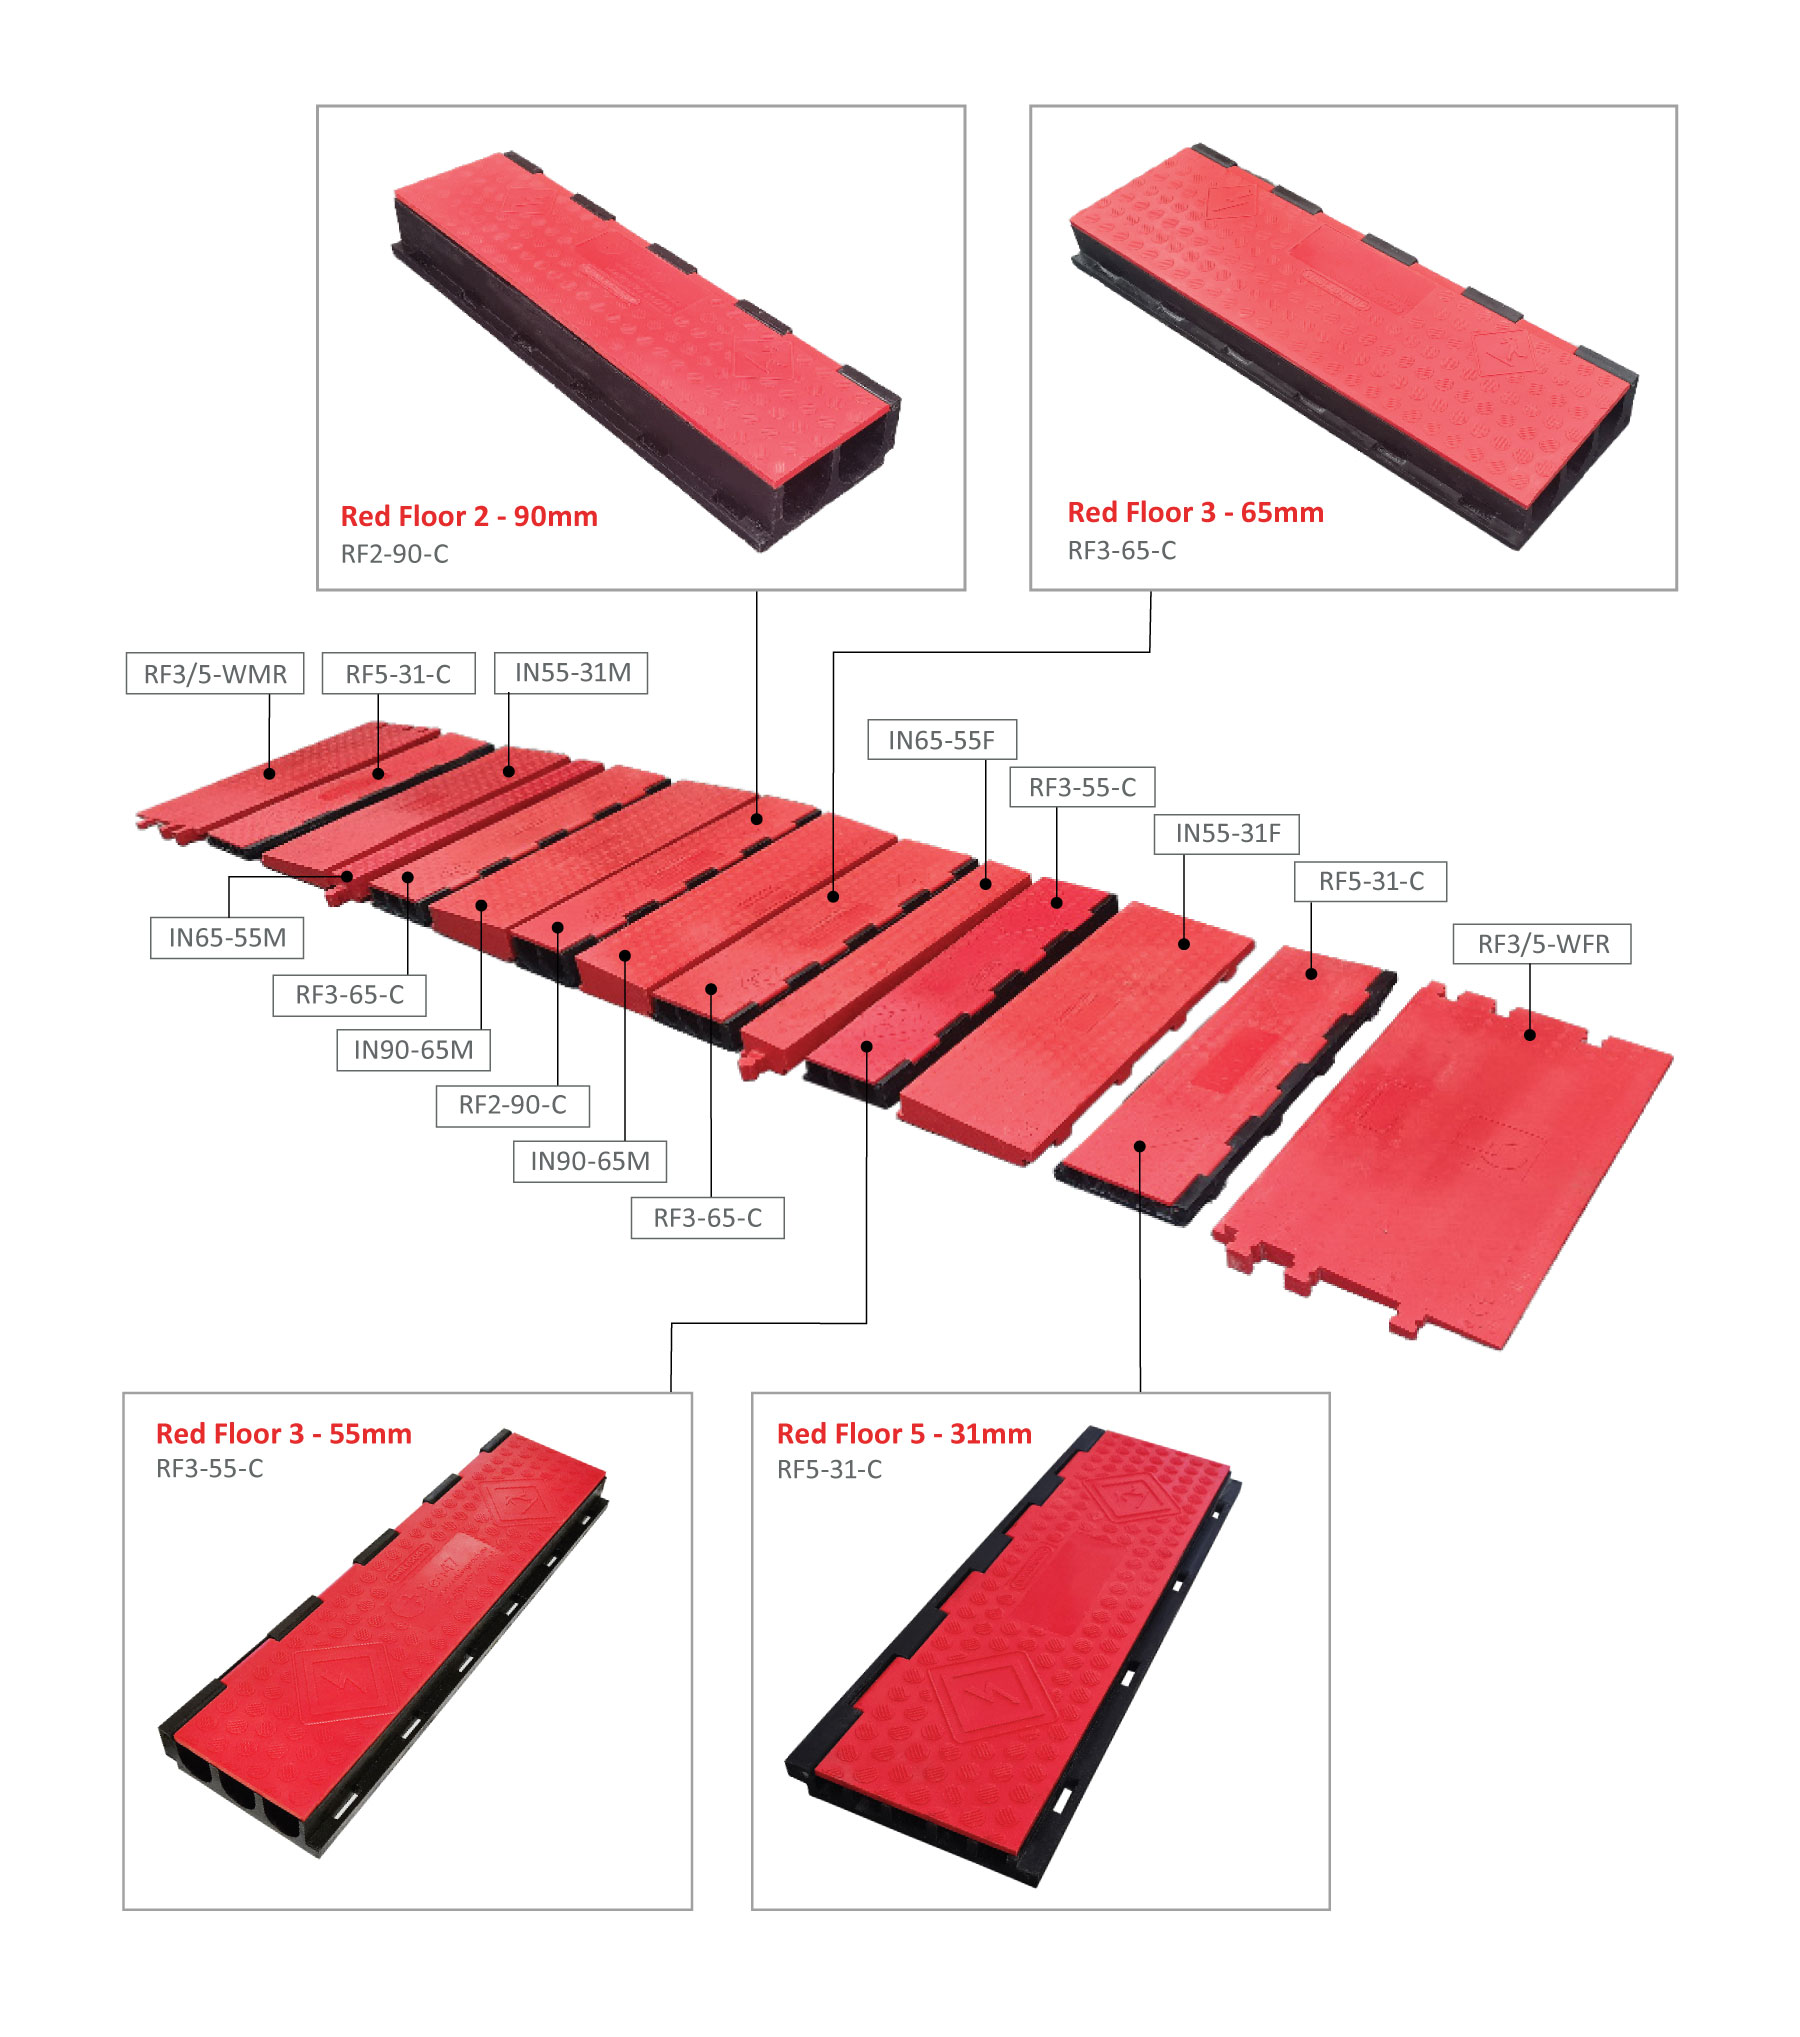 Example Red Floor Configuration